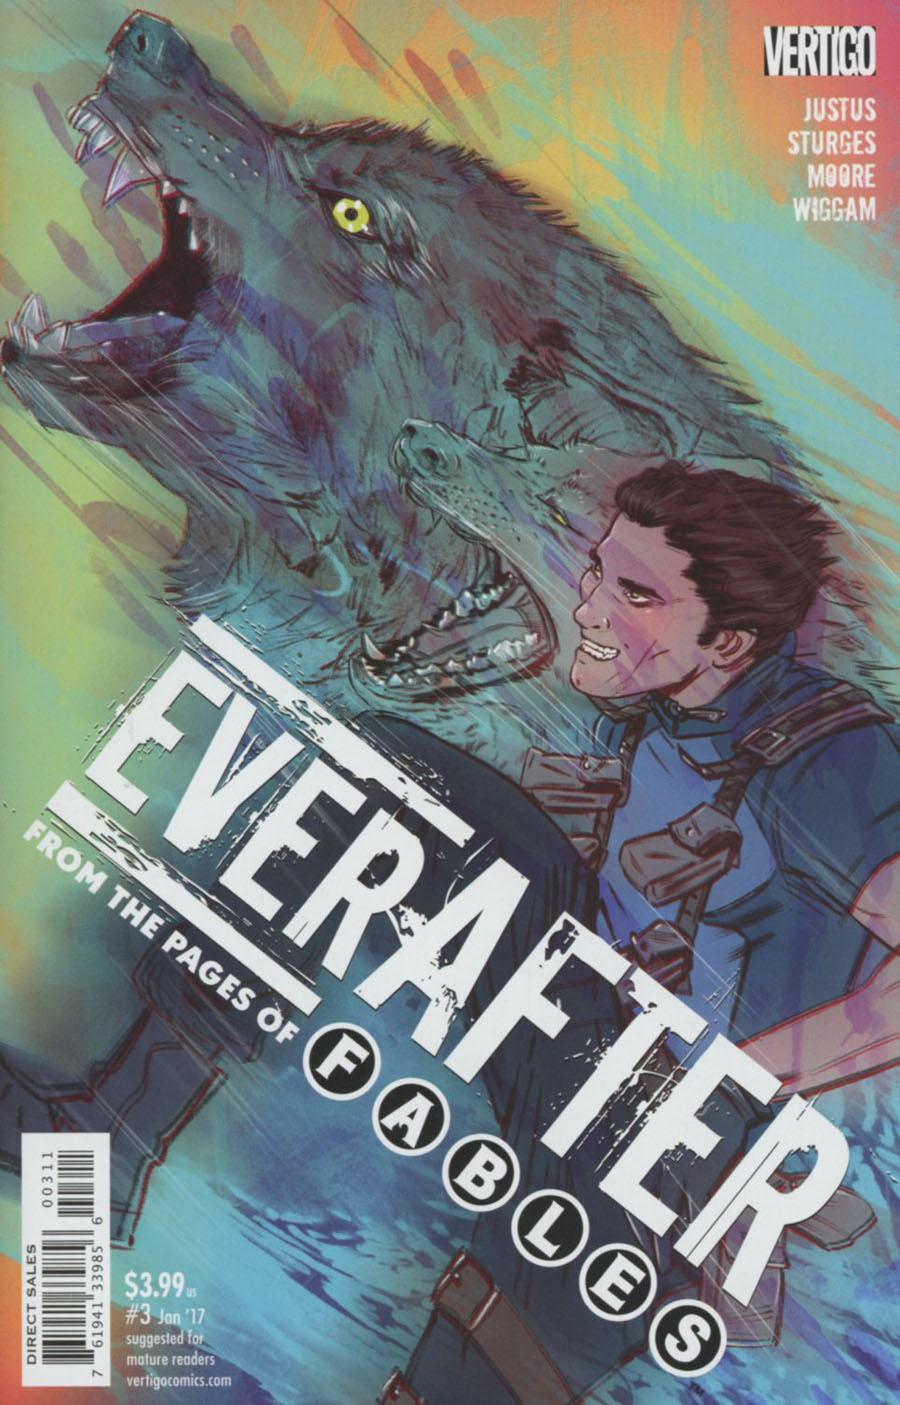 Everafter From The Pages Of Fables Vol. 1 #3